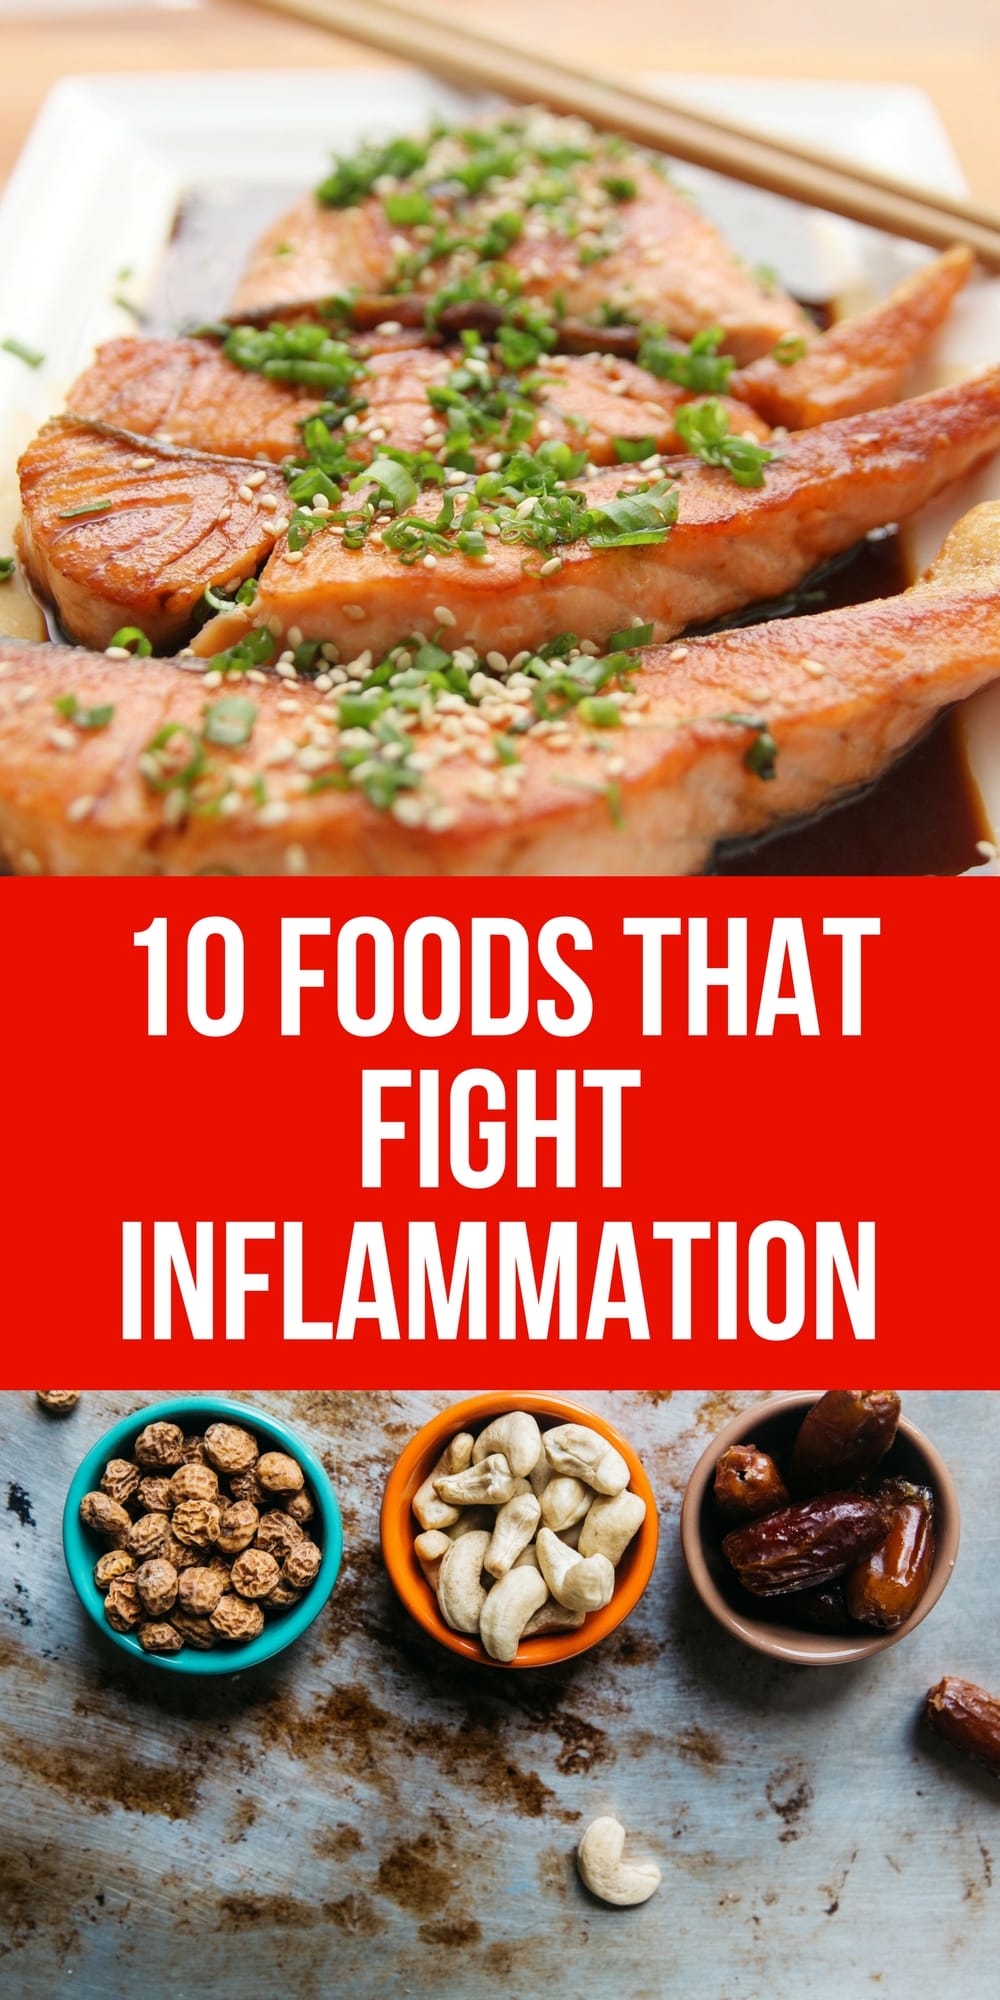 Lots of good tips and recipes for foods that fight inflammation.